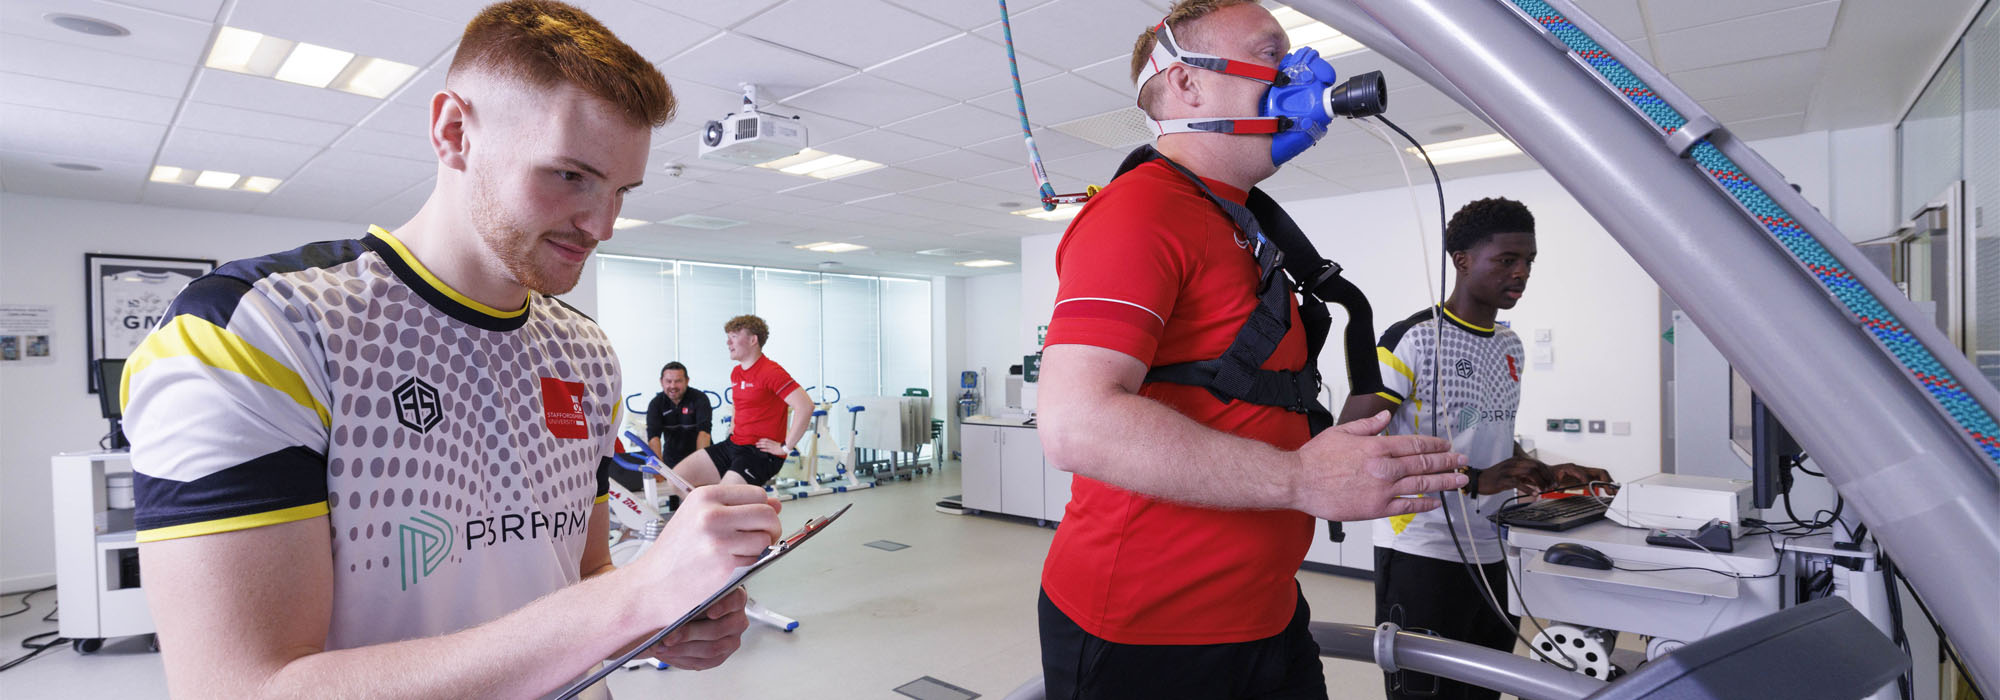 A group of male students wearing sports clothing using the running machine alongside various physiological monitoring equipment in the sports and exercise lab